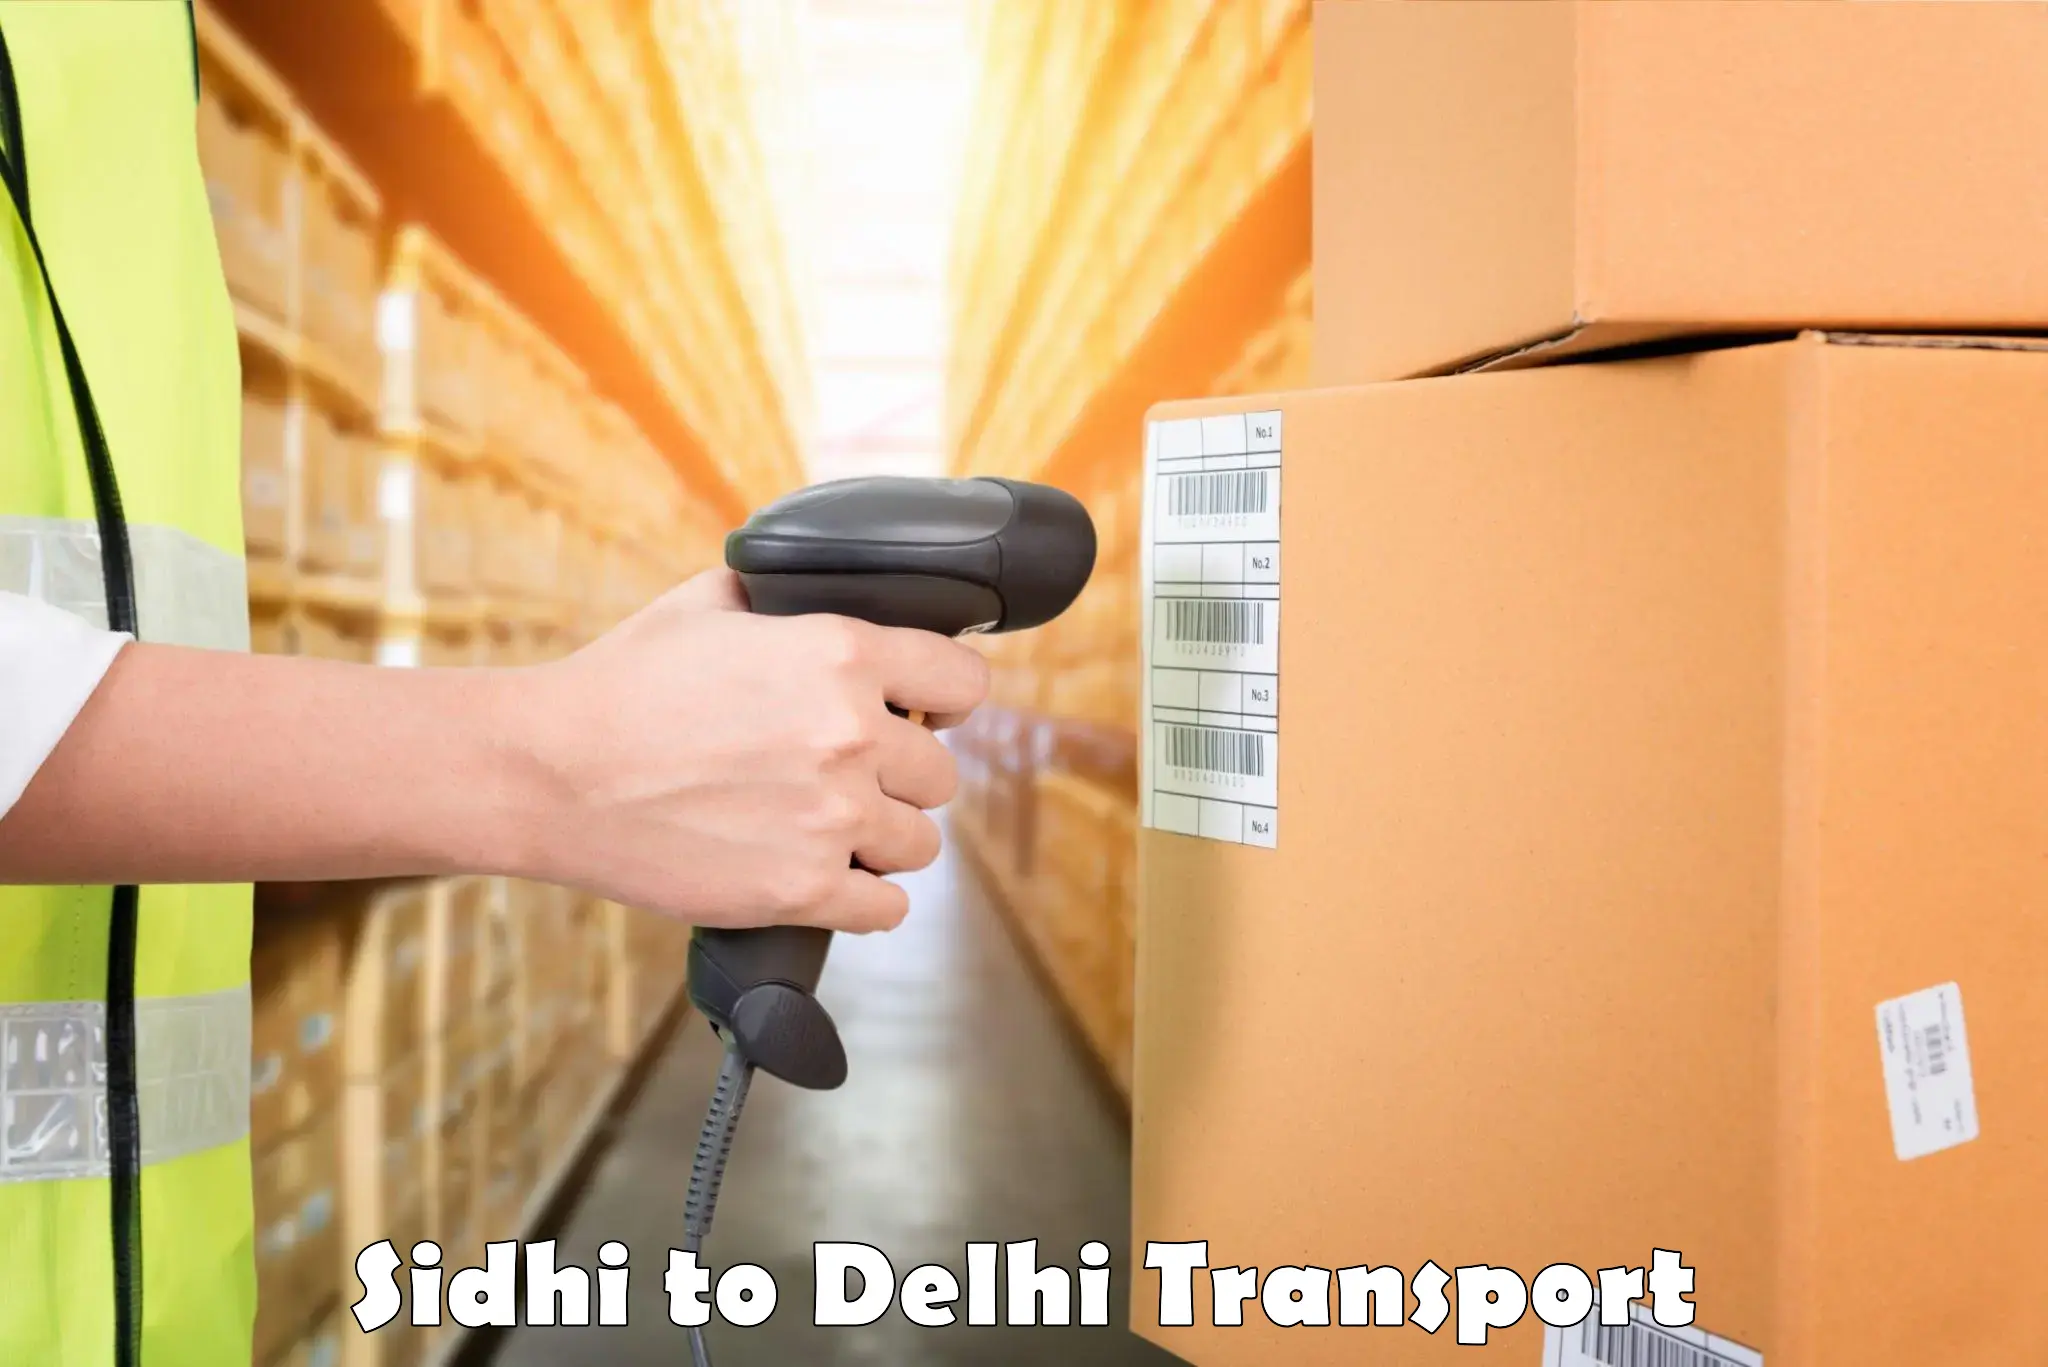 Transport in sharing Sidhi to NCR